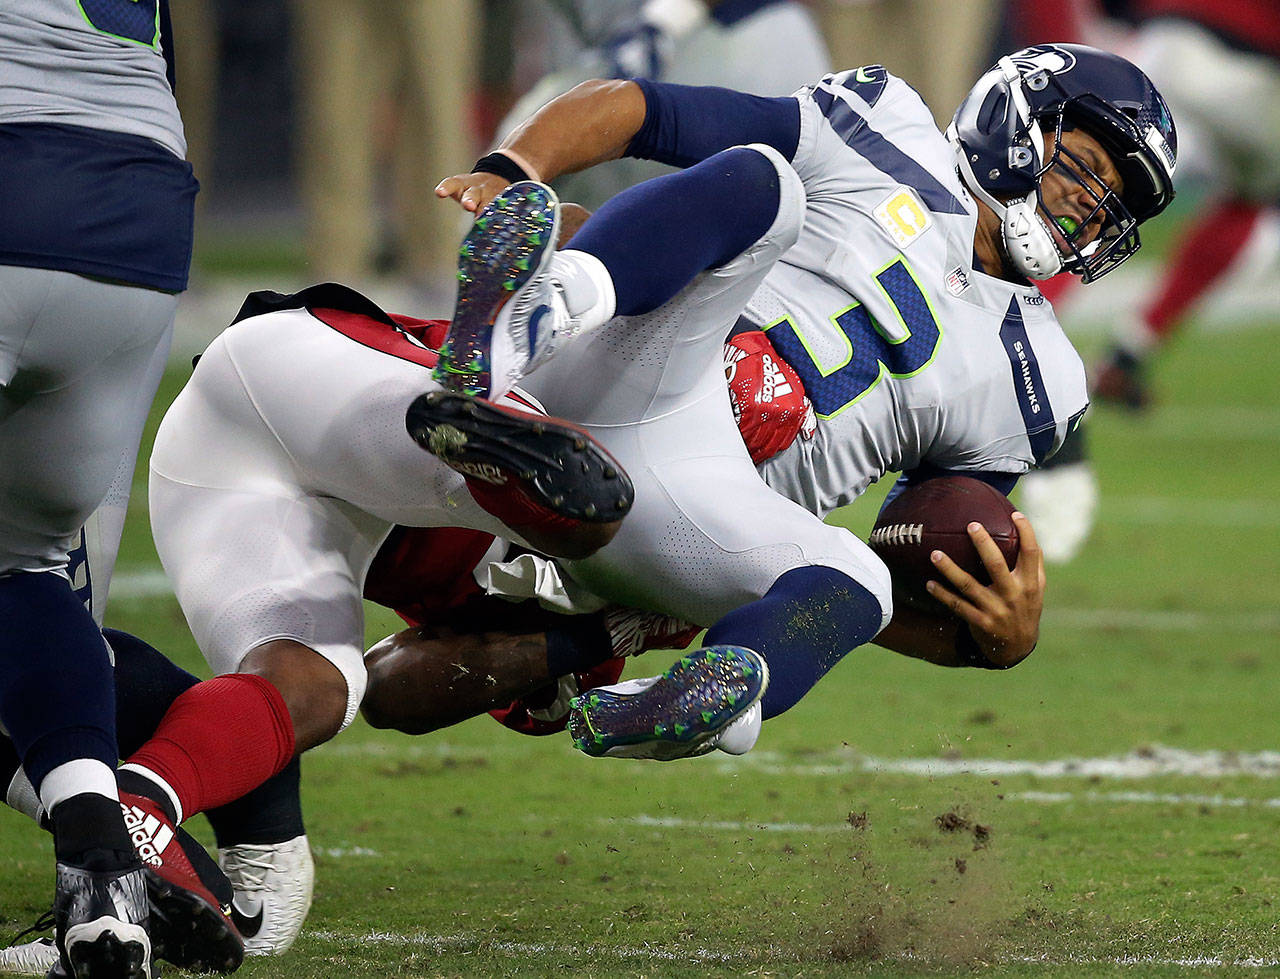 Seahawks quarterback Russell Wilson (3) is sacked by Cardinals linebacker Haason Reddick during the first half of a game Sept. 30, 2018, in Glendale, Ariz. (AP Photo/Ross D. Franklin)